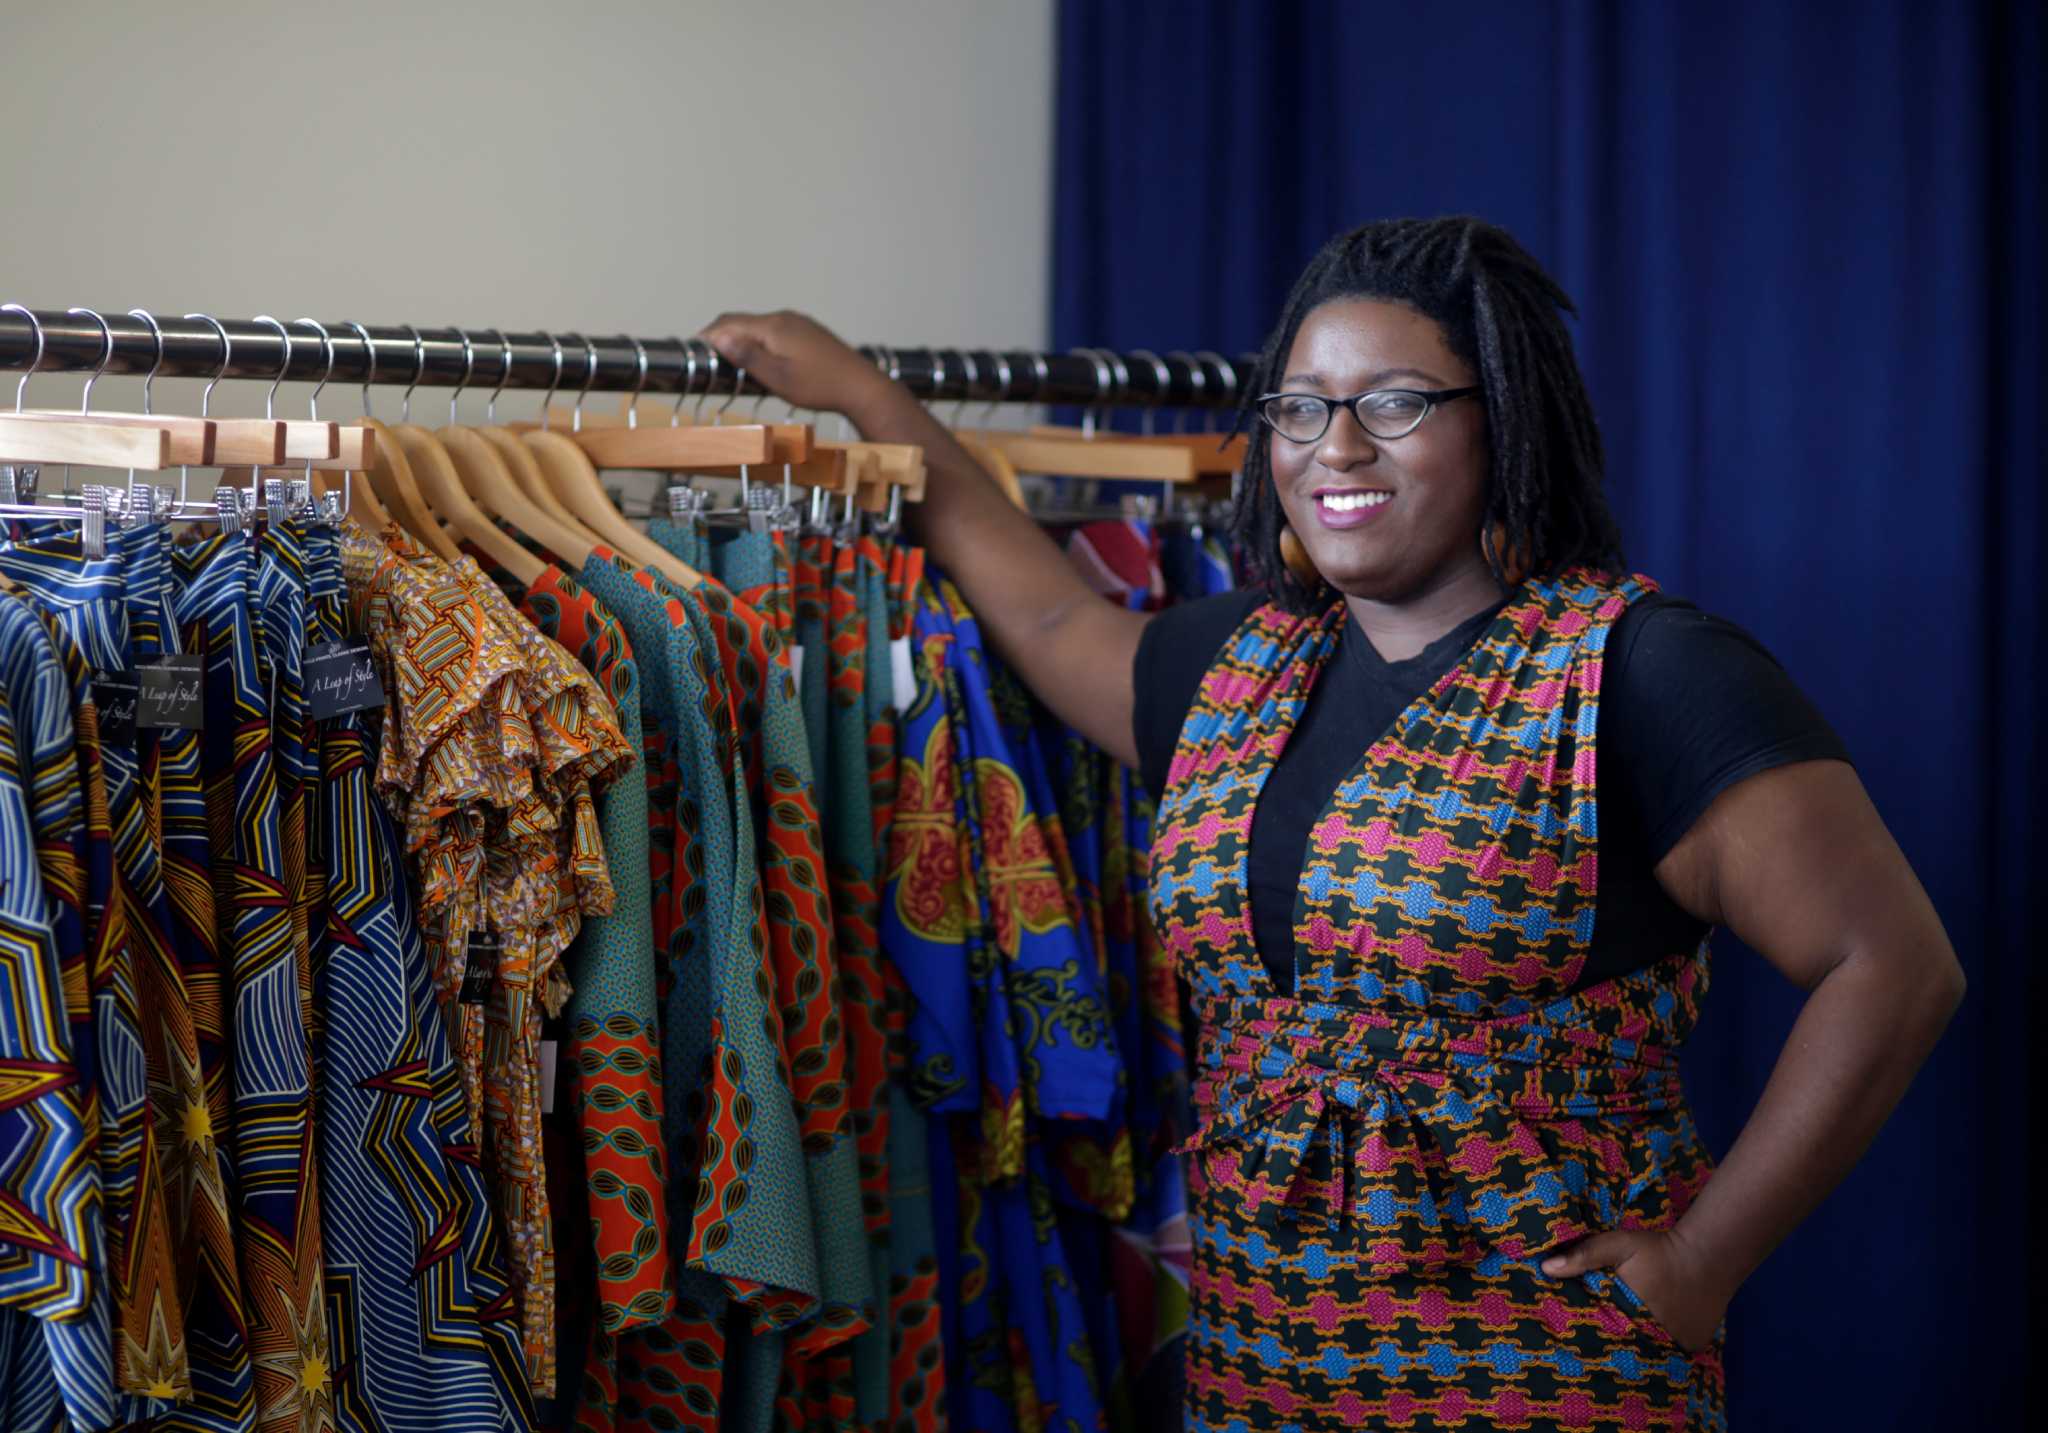 Find your perfect outfit at Black-owned Houston